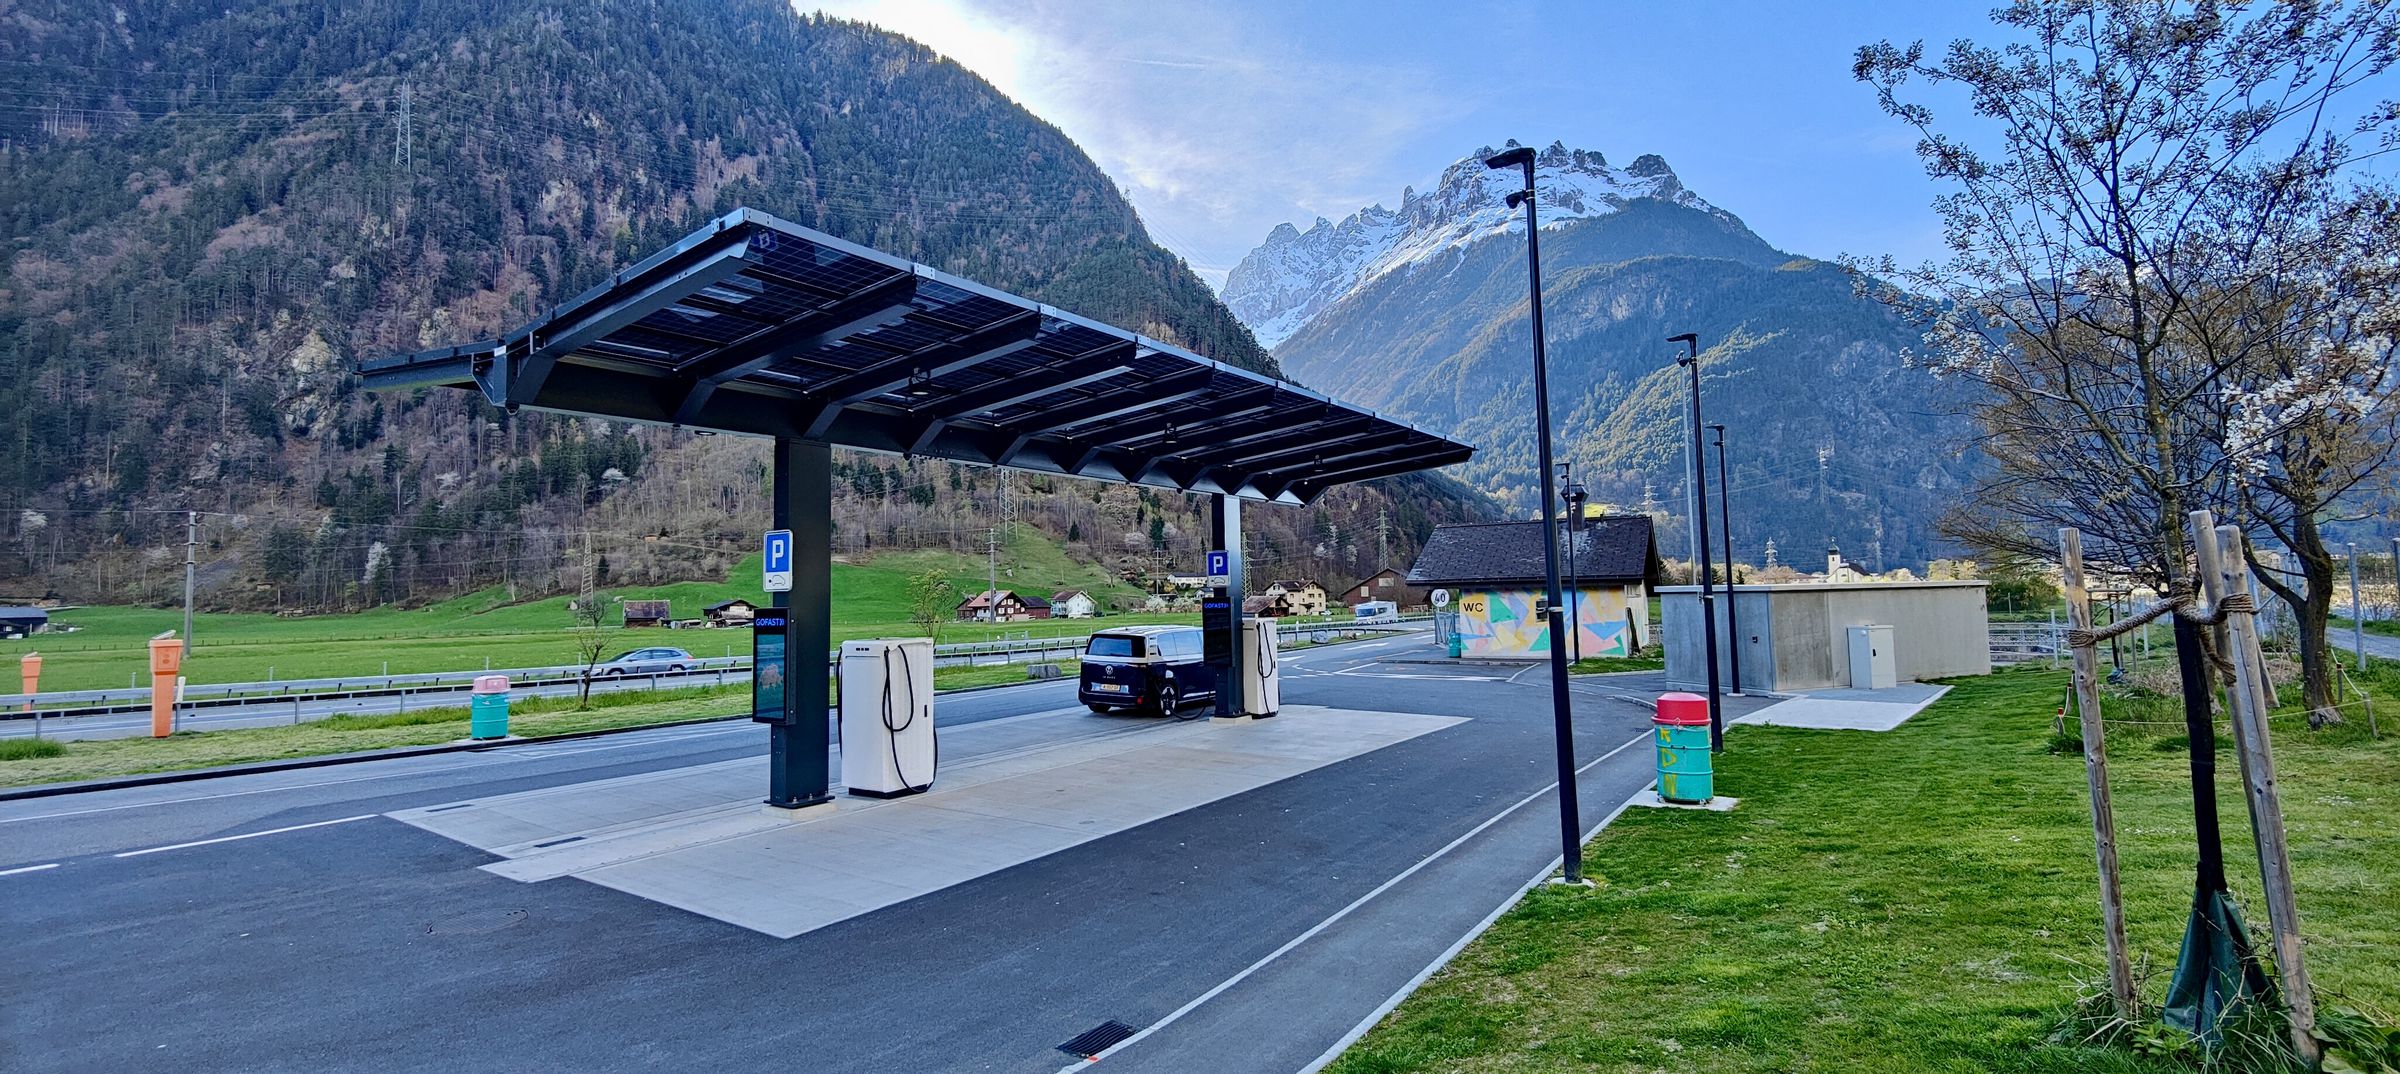 <em>A typical scene at ultra-fast charging stations: everything working and lots of availability. This one had a long protected walking path for the dog along the right-hand side bordering a creek. </em>